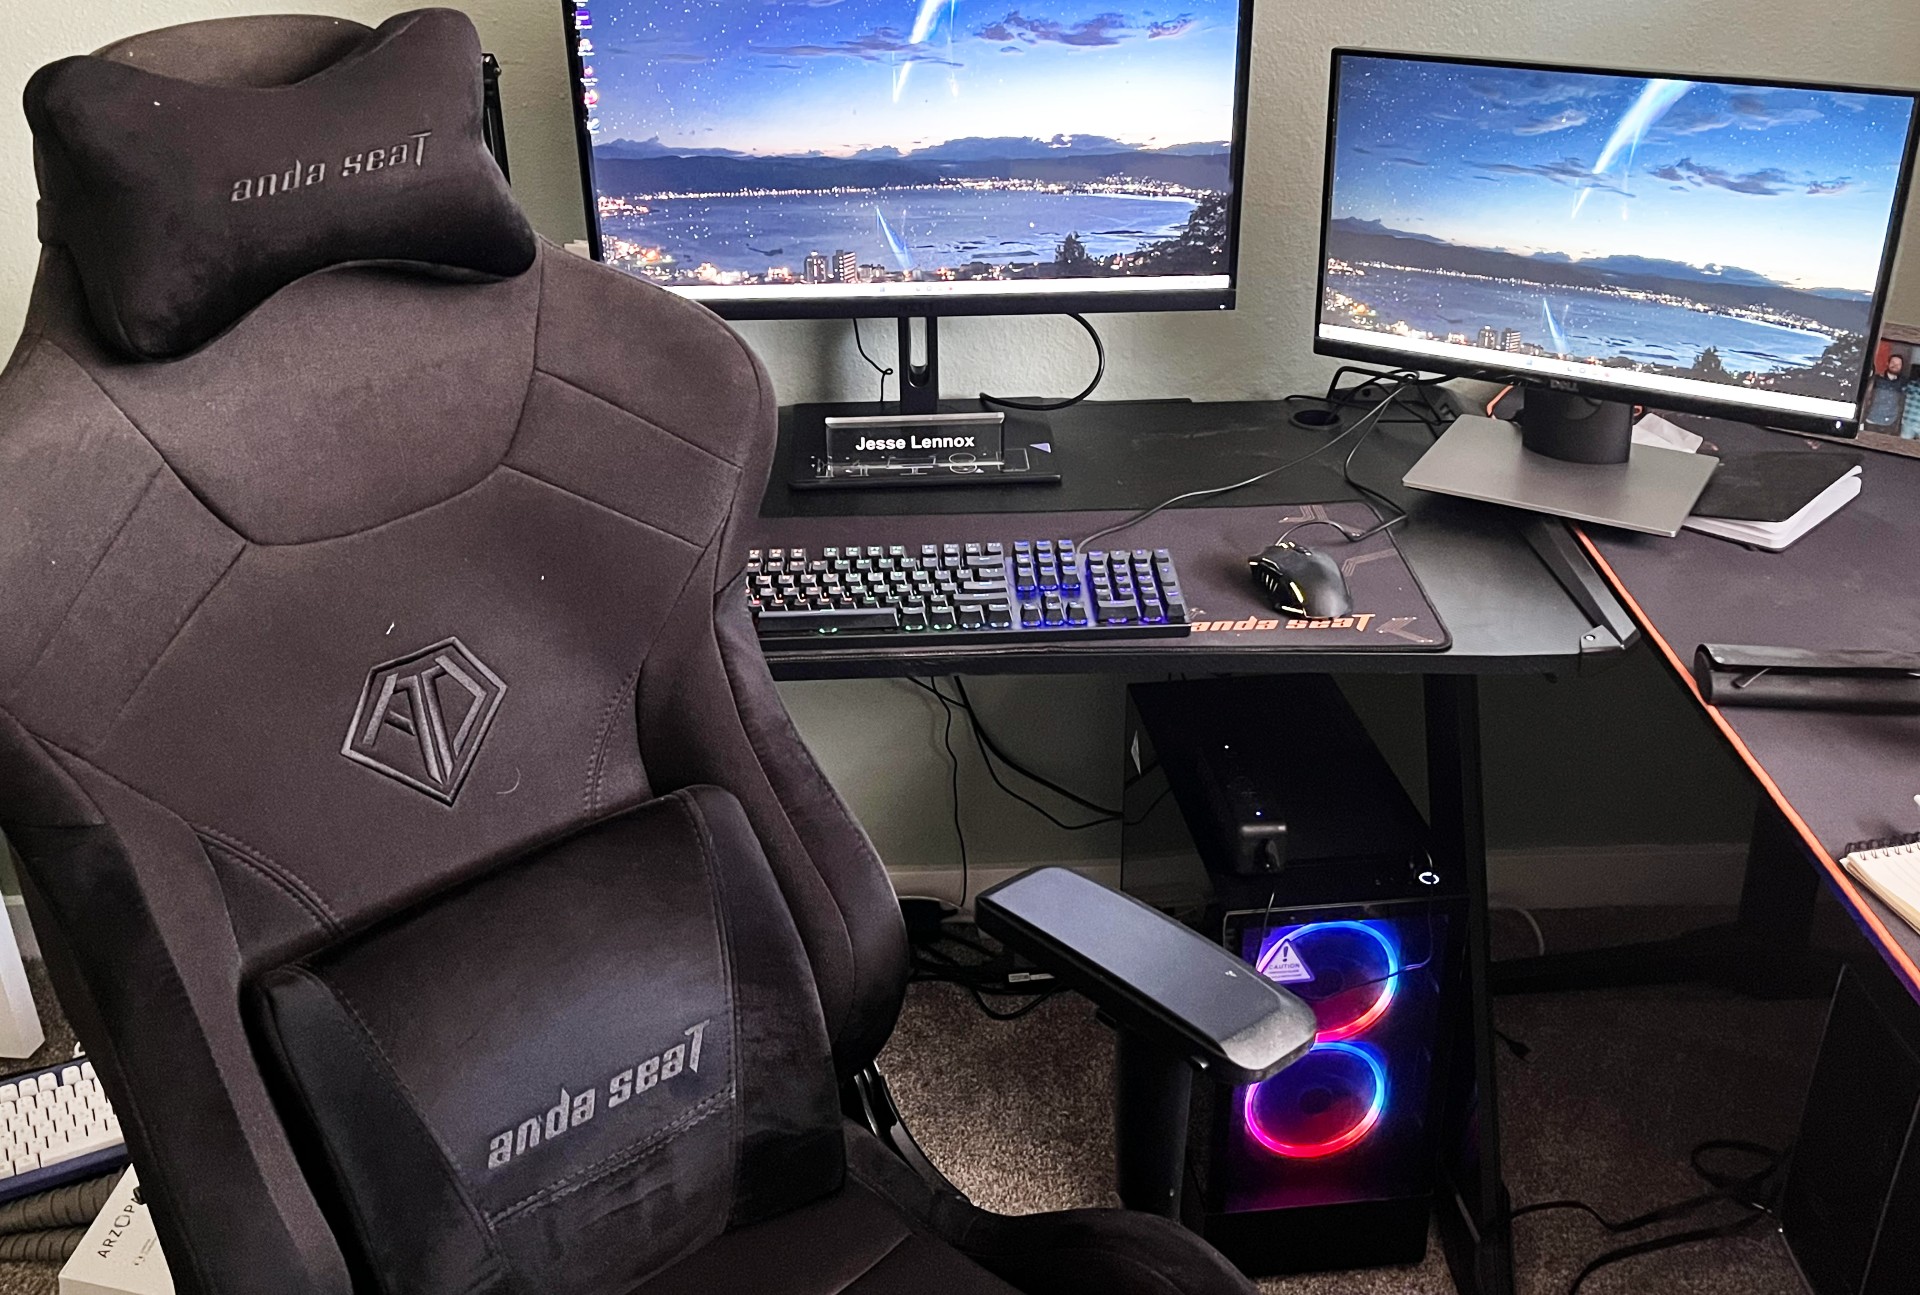 A PC gaming desktop setup with two monitors and a gaming chair.